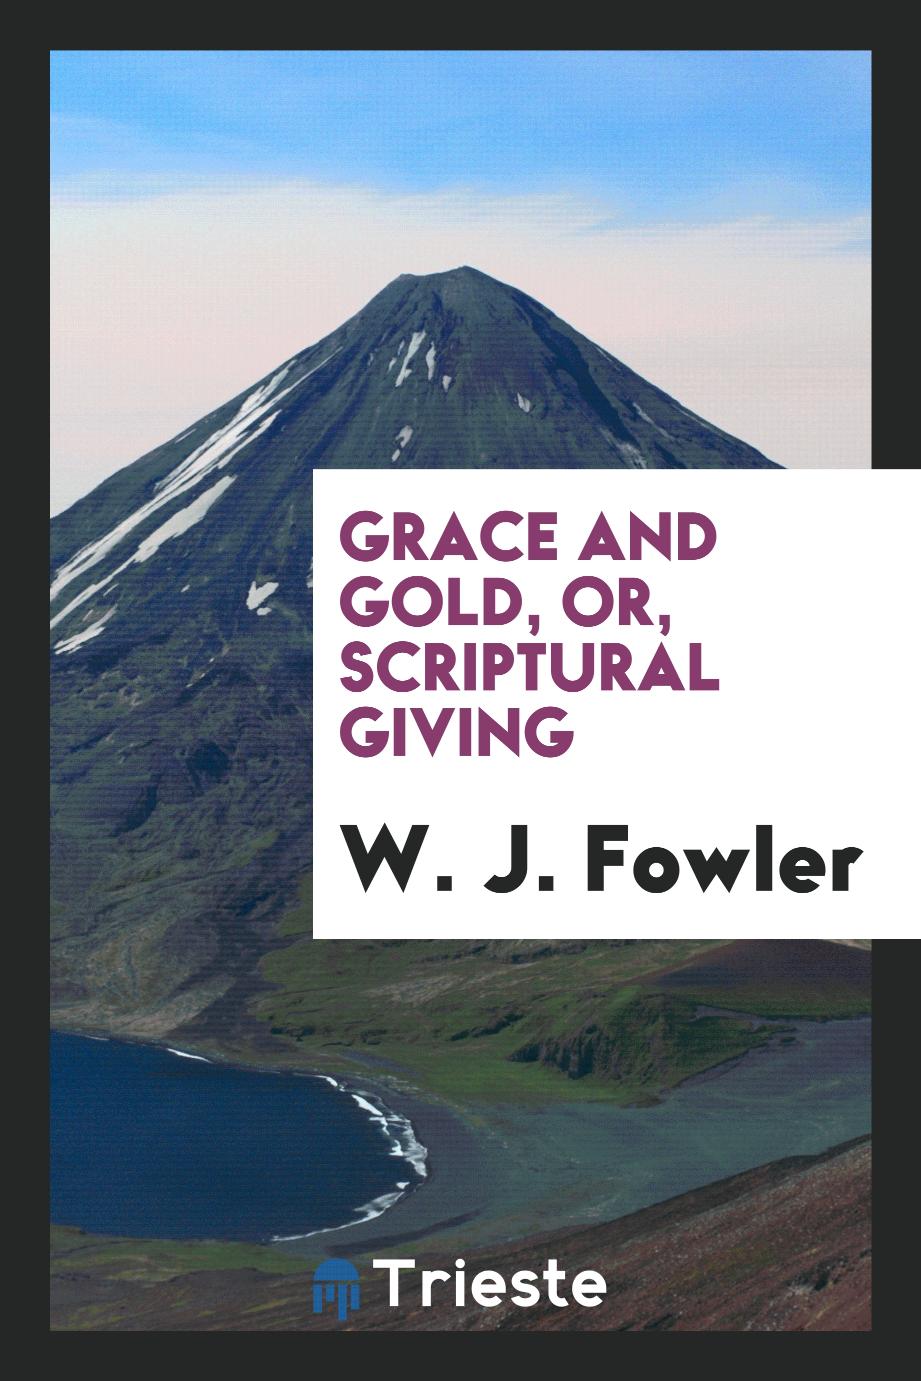 Grace and gold, or, Scriptural giving